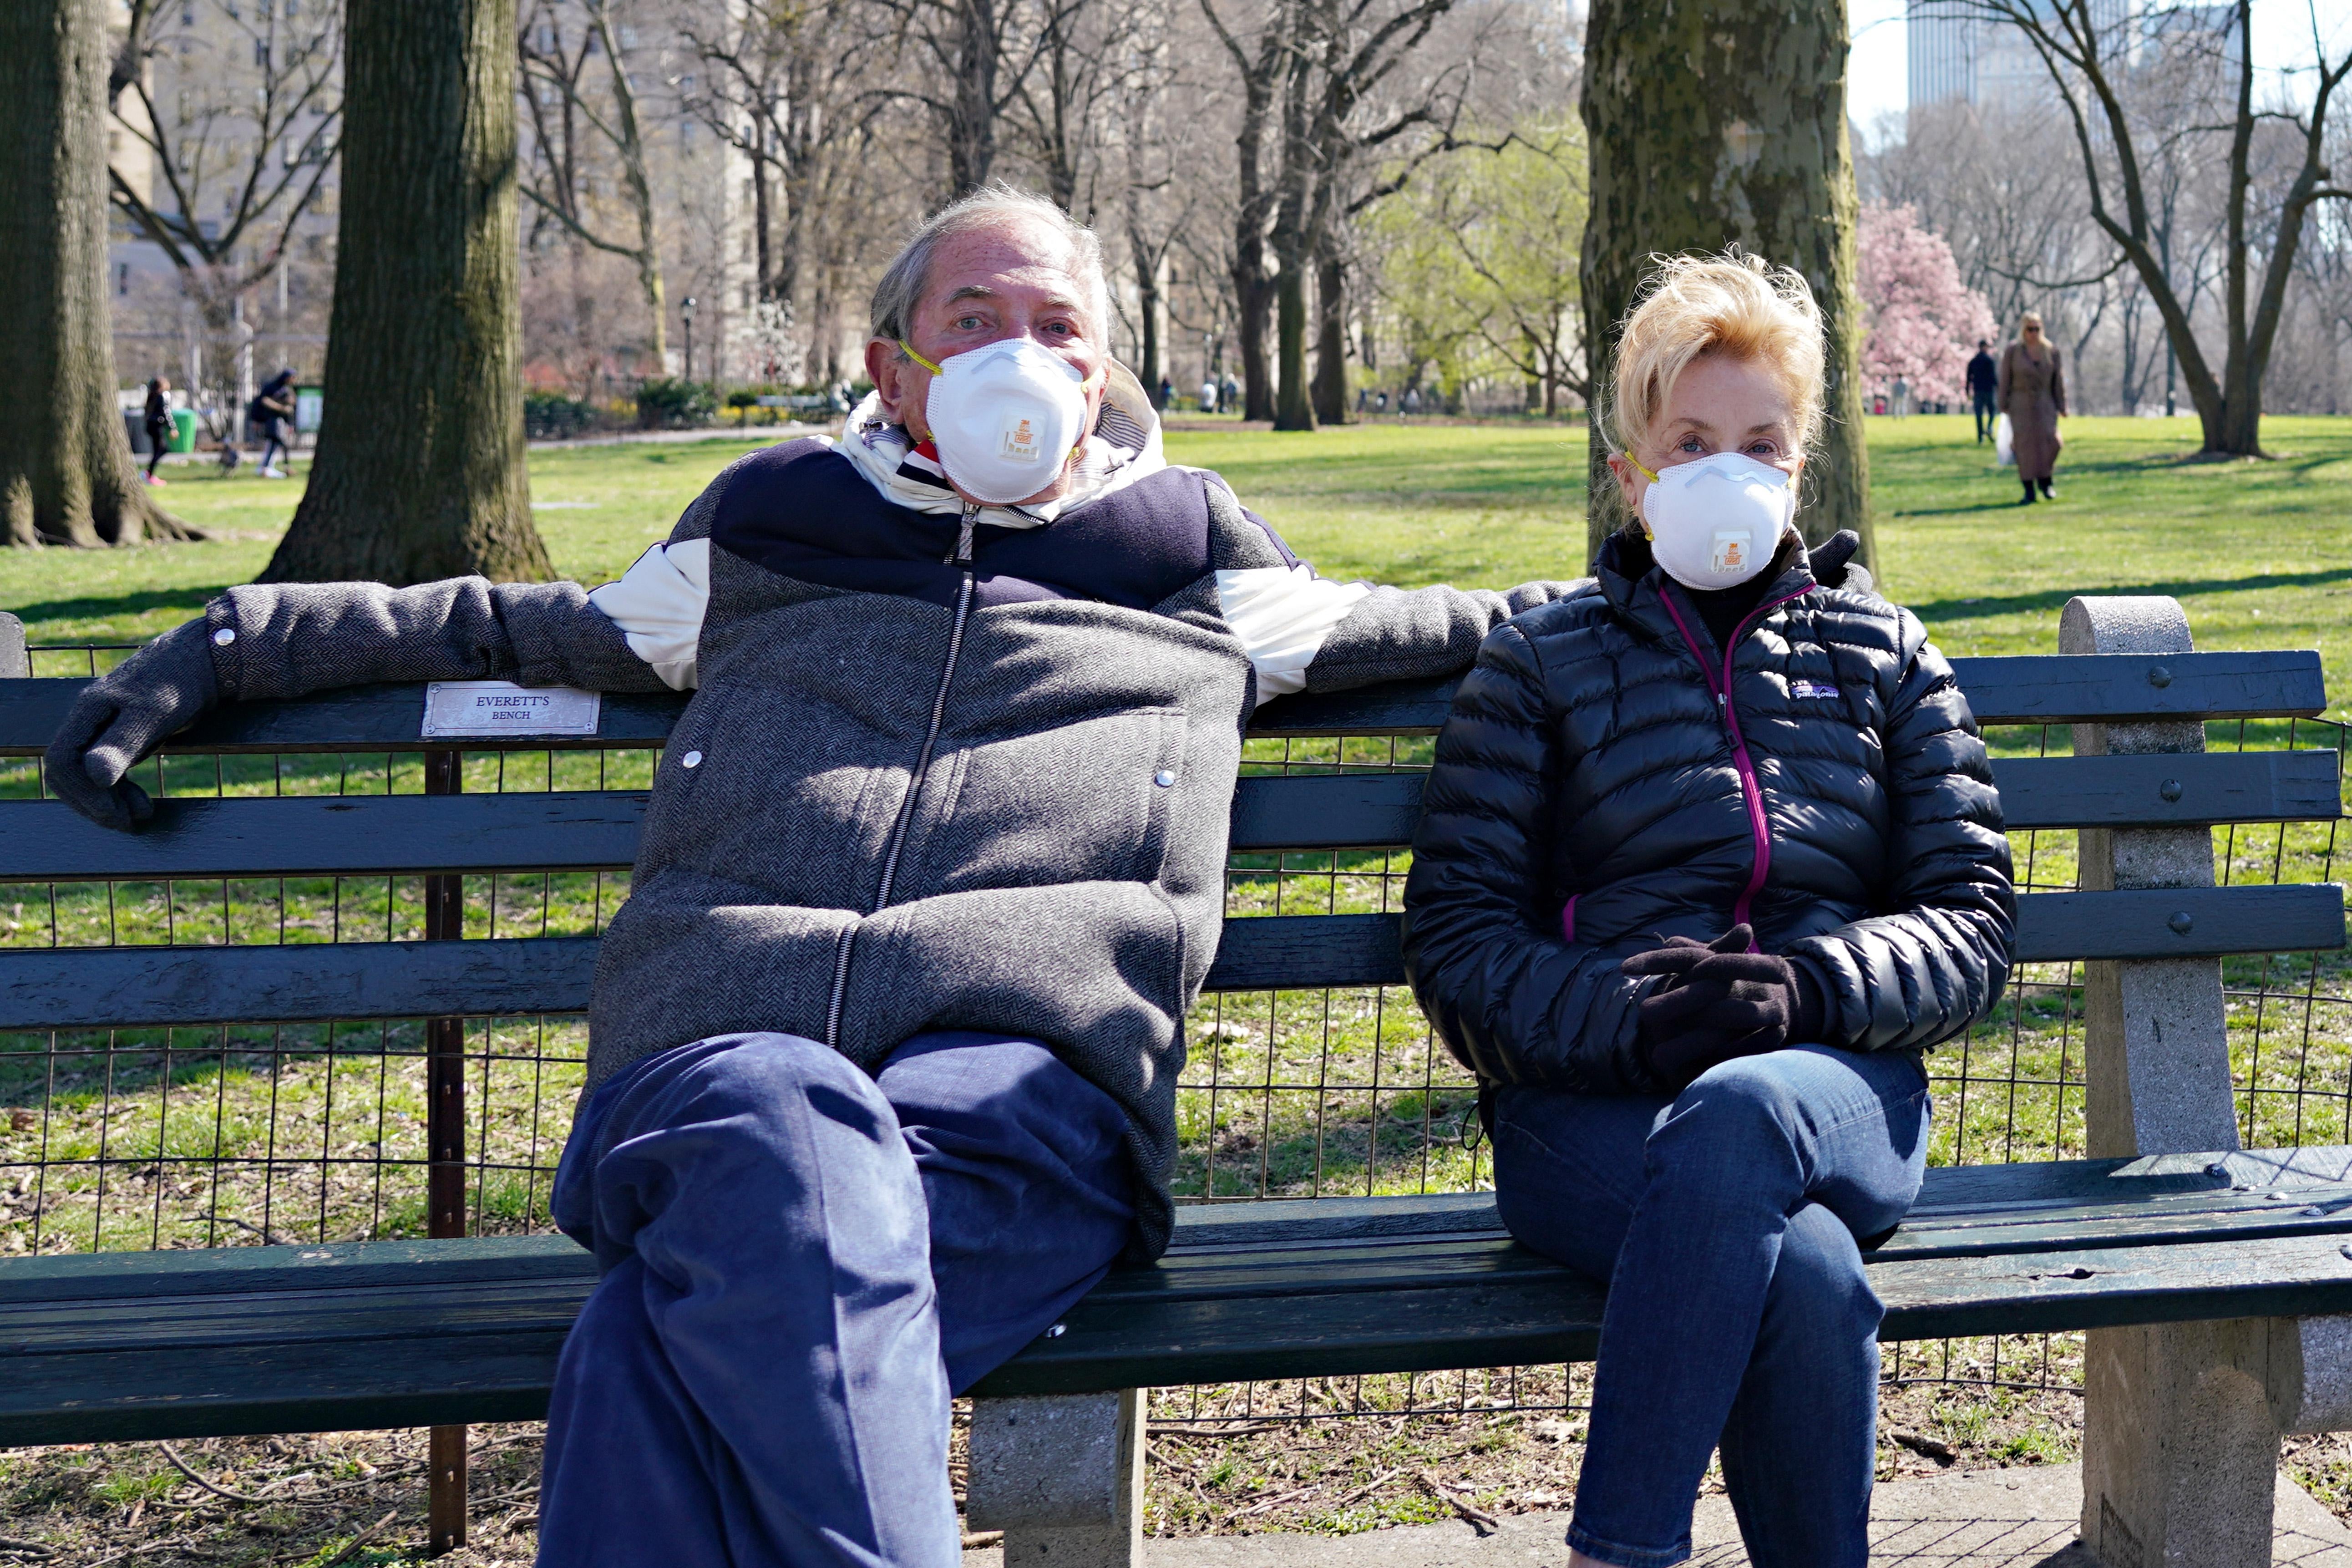 A man and a woman, both wearing masks, sit on a bench in the park